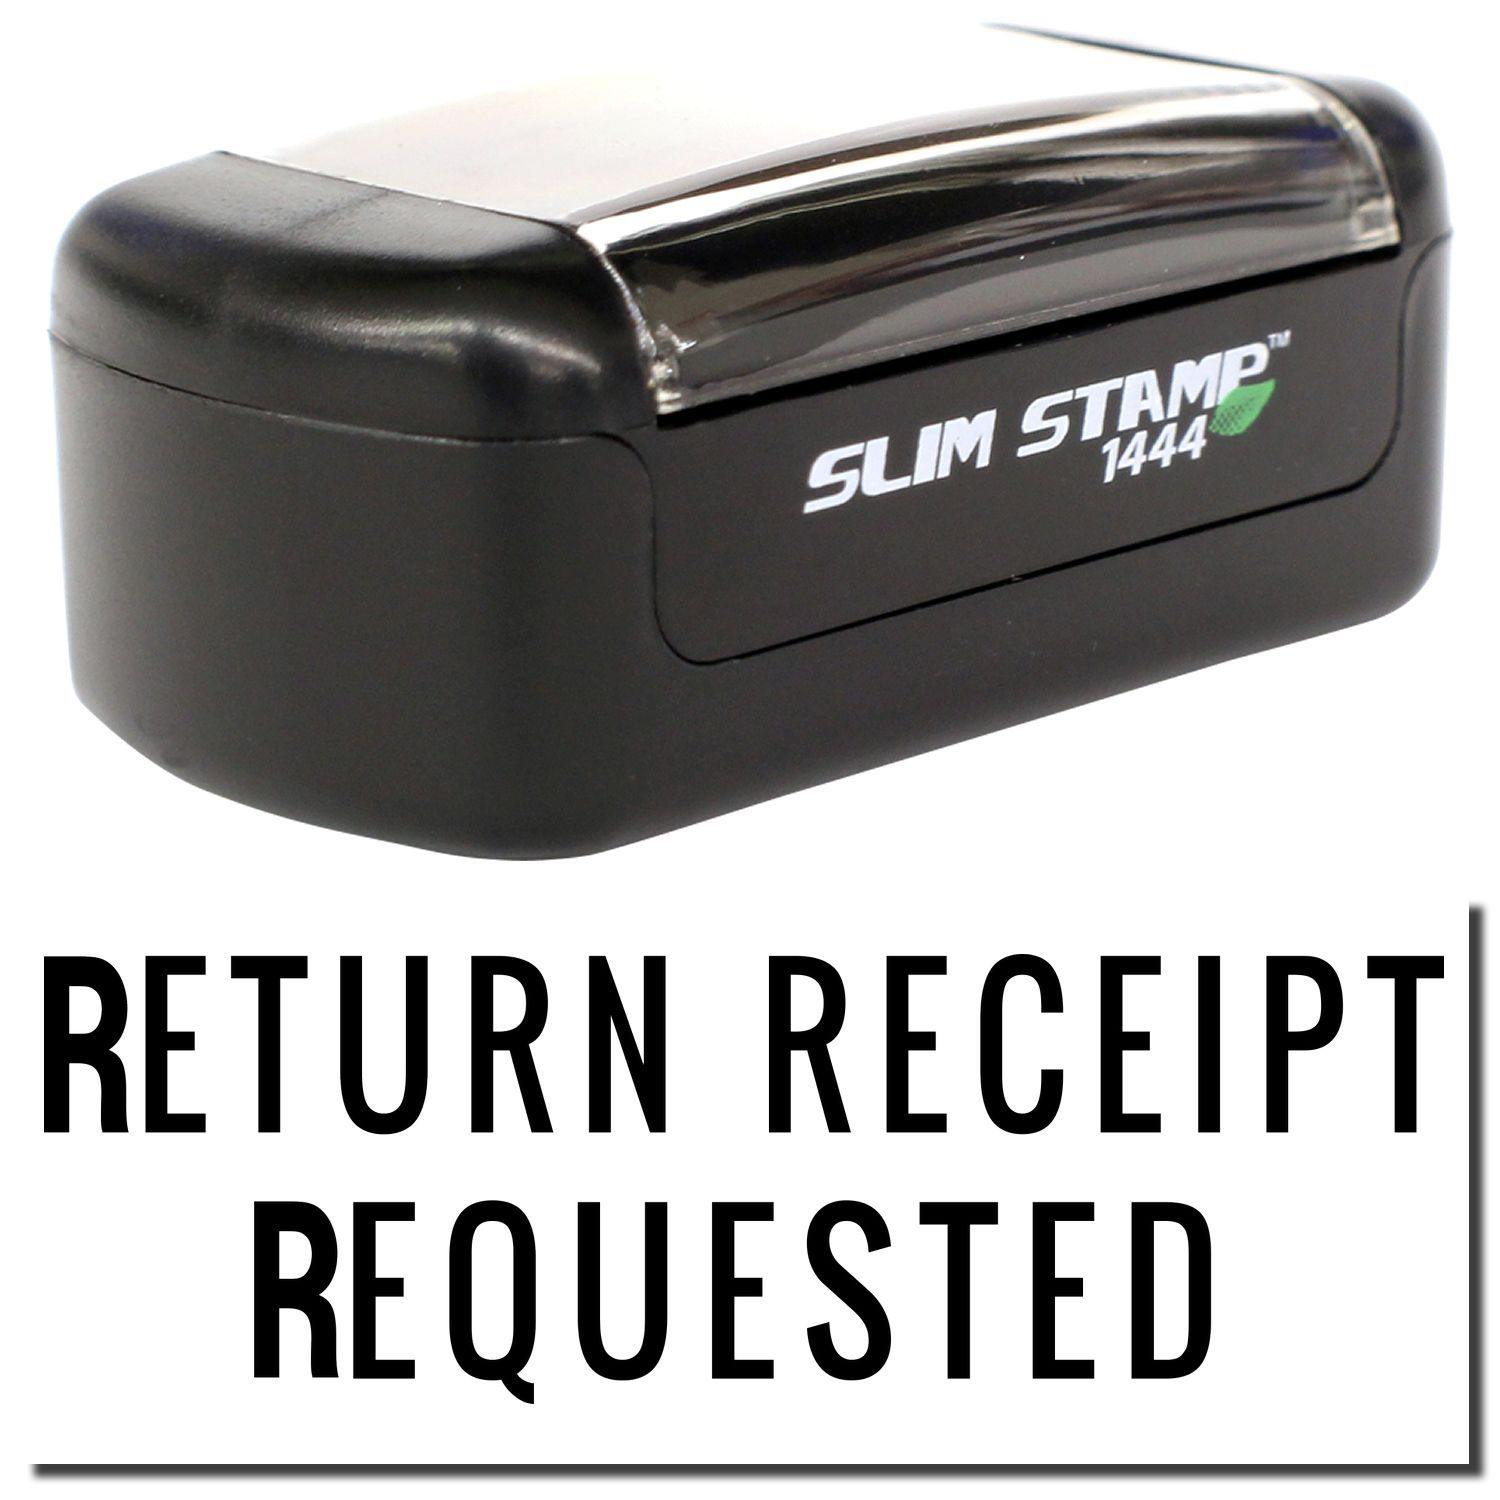 A stock office pre-inked stamp with a stamped image showing how the text "RETURN RECEIPT REQUESTED" in a narrow font is displayed after stamping.